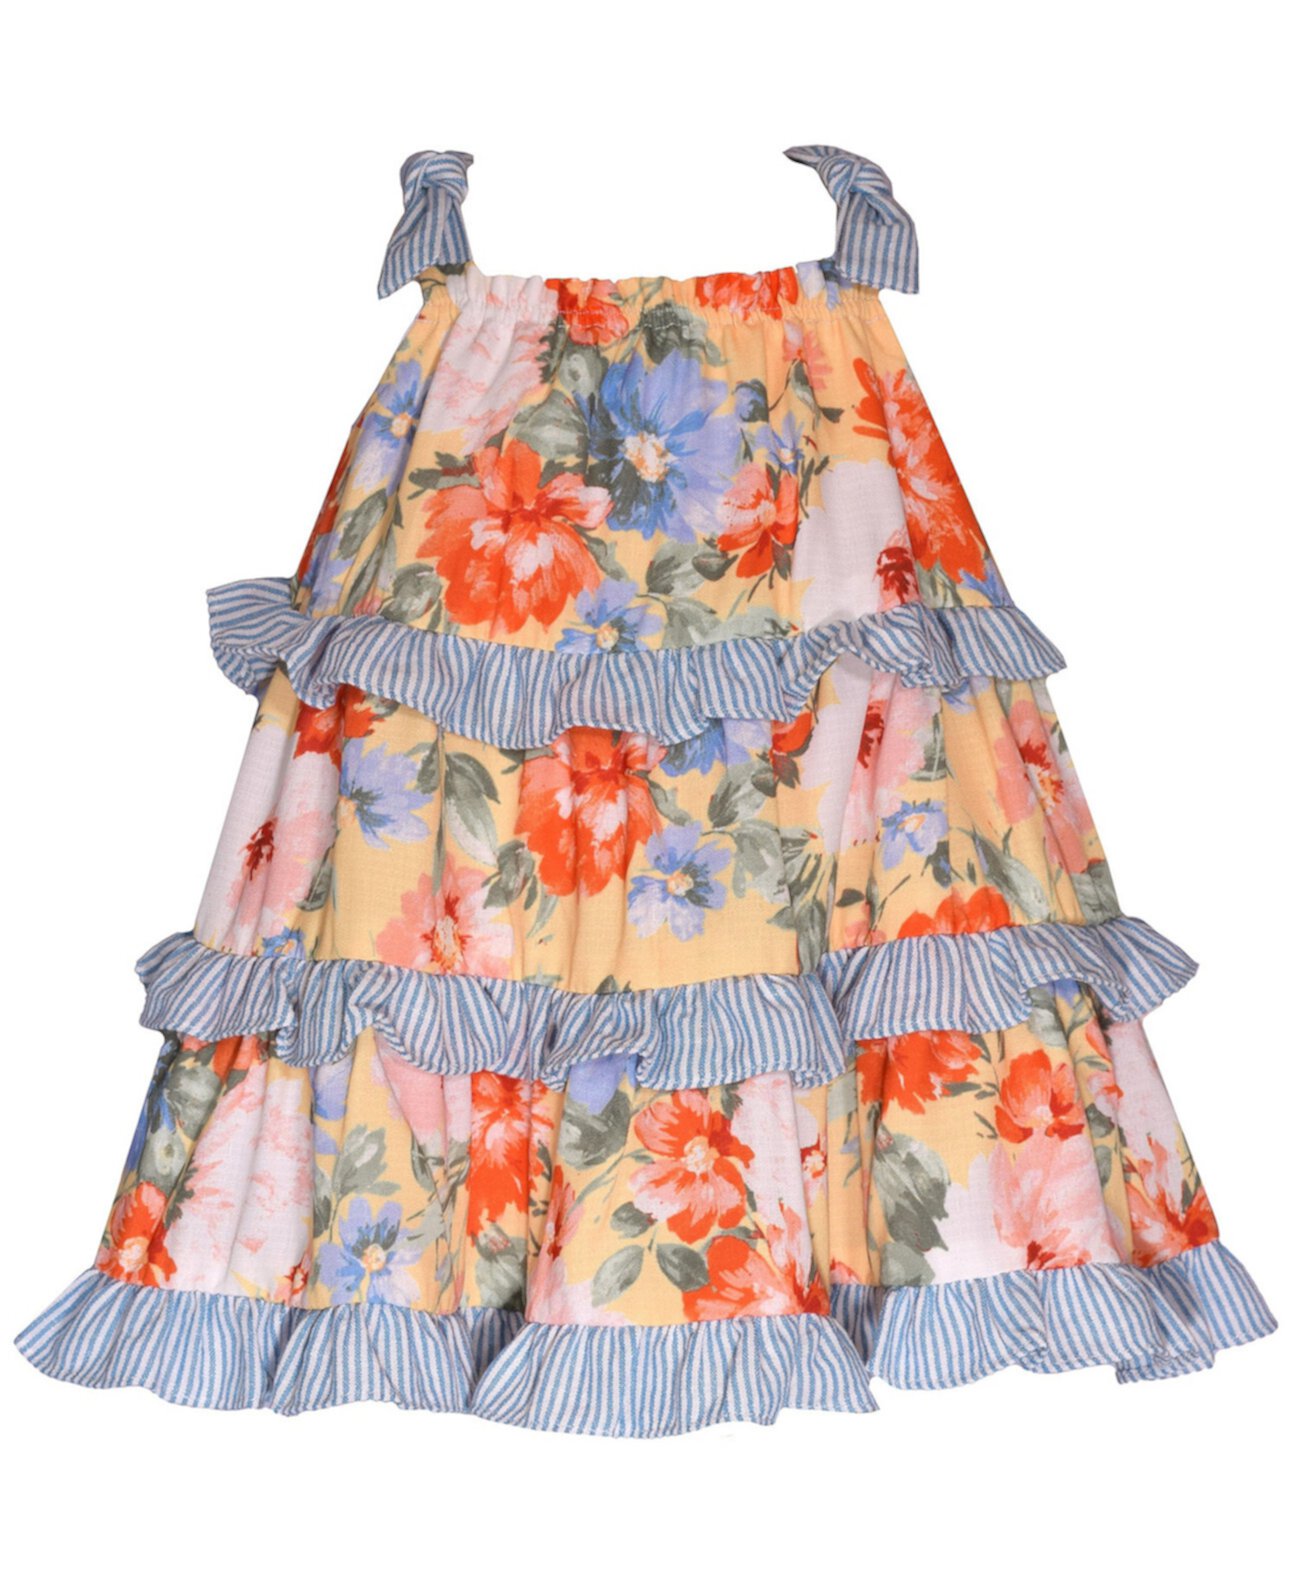 Baby Girls Mixed Print Bow Shoulder Dress with Ruffled Tiers Bonnie Baby